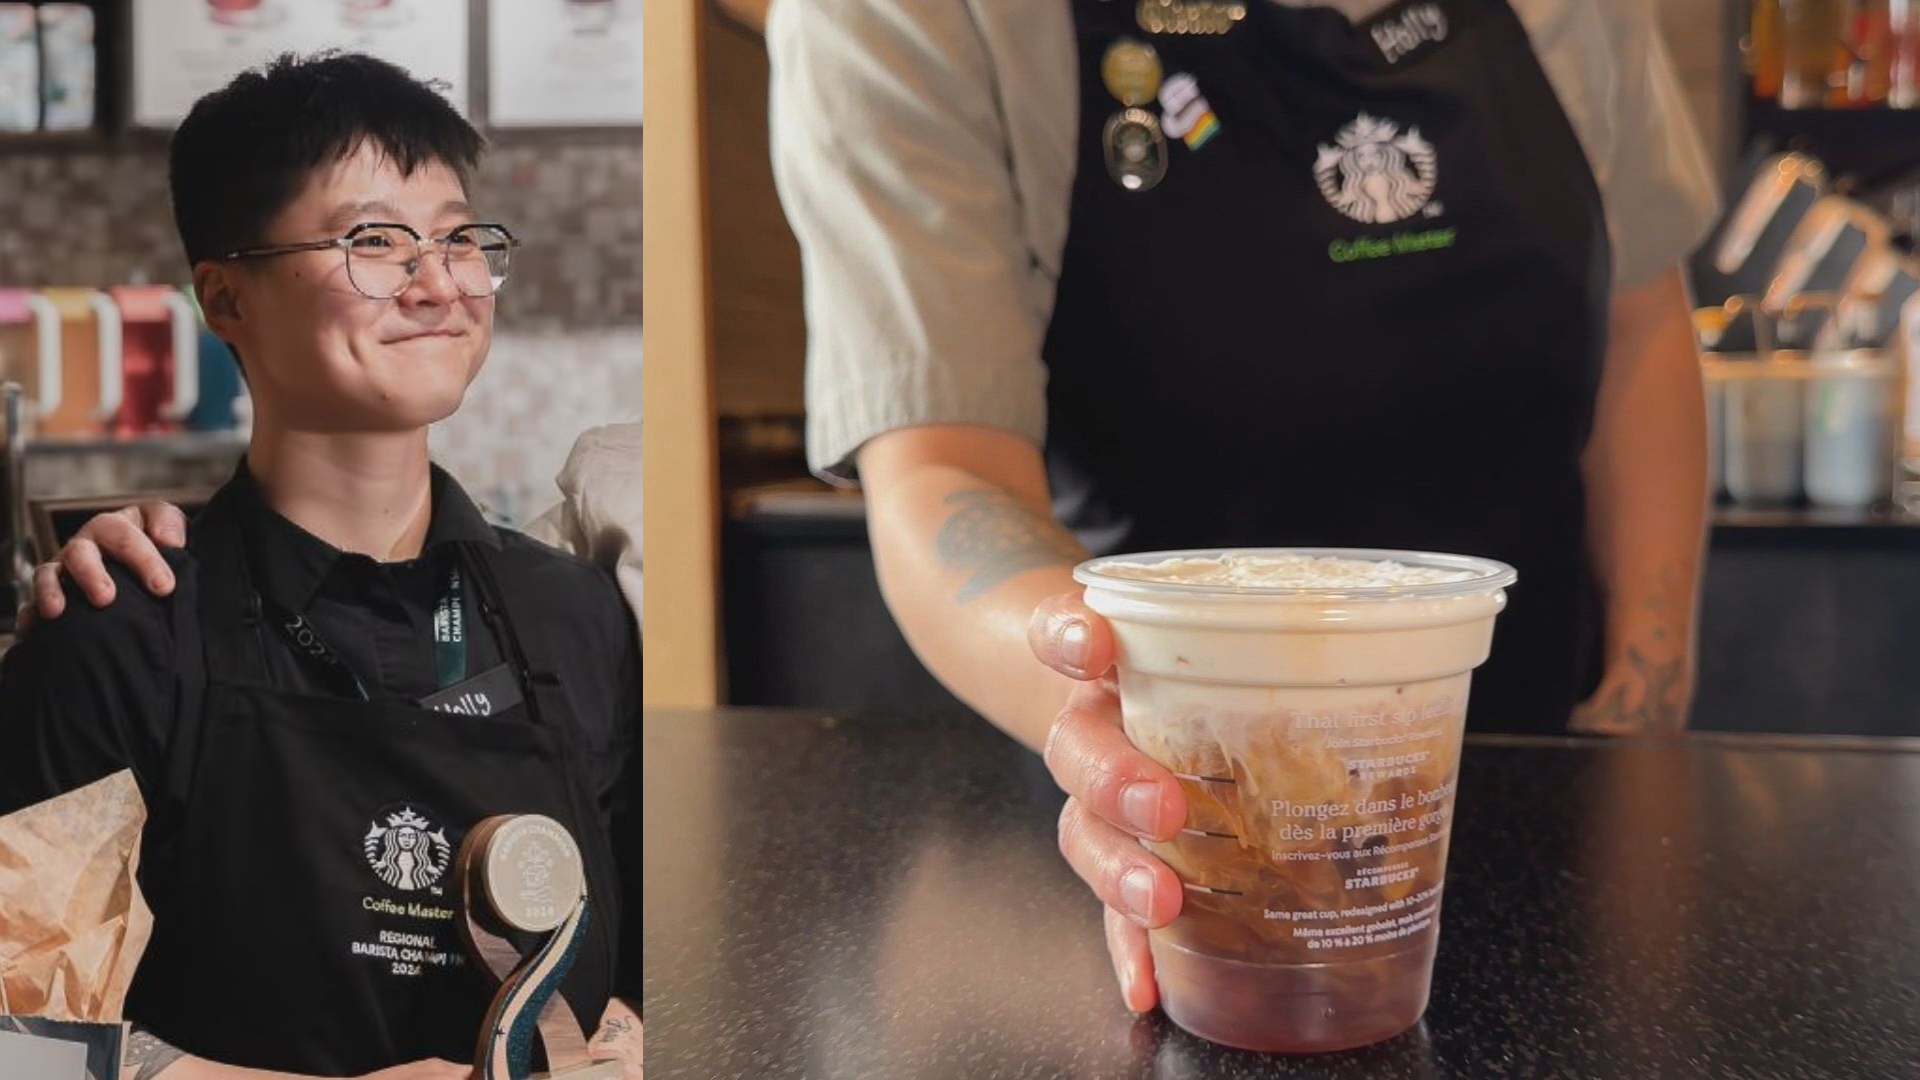 New Westminster barista heads to North American Barista Championships